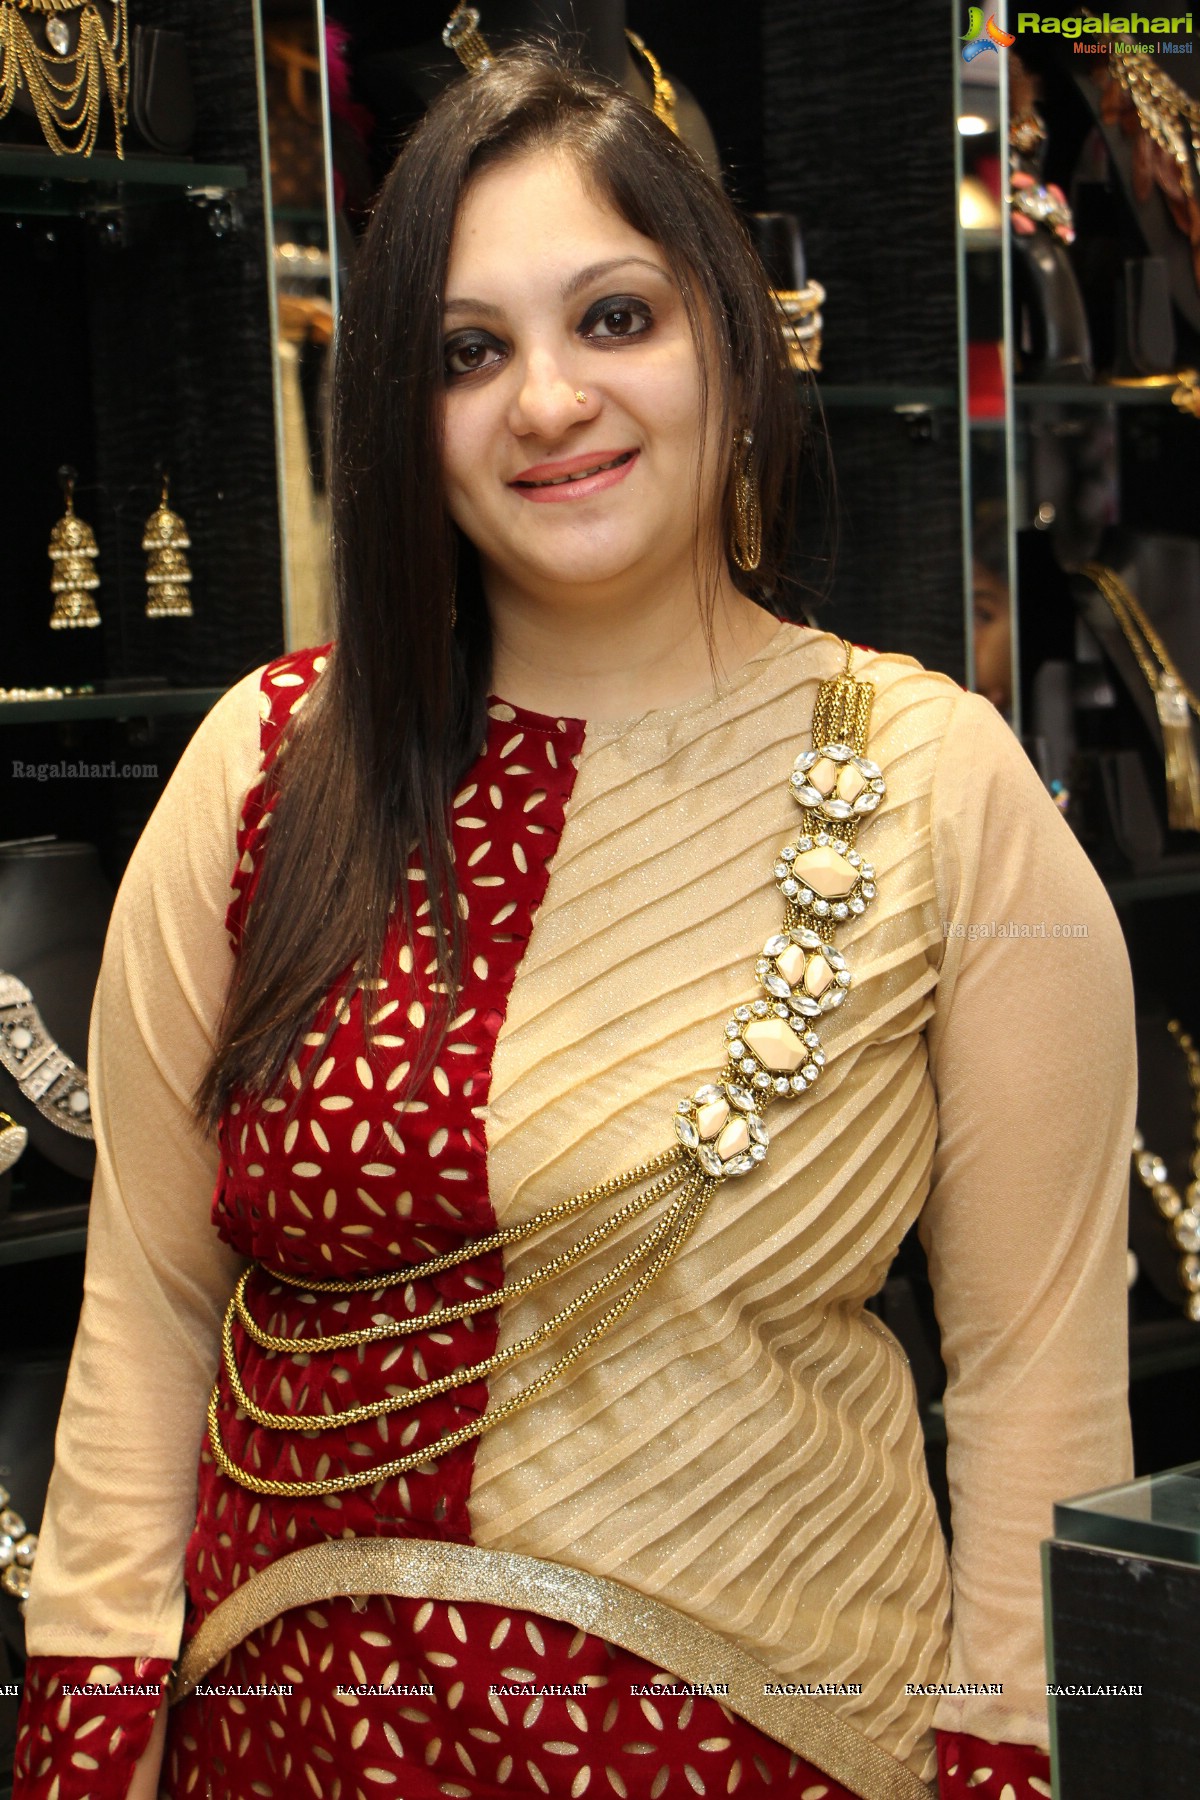 Sparks N Sizzles-The Art Of Gems, Jewels N Clothing Store Launch at Banjara Hills, Hyderabad